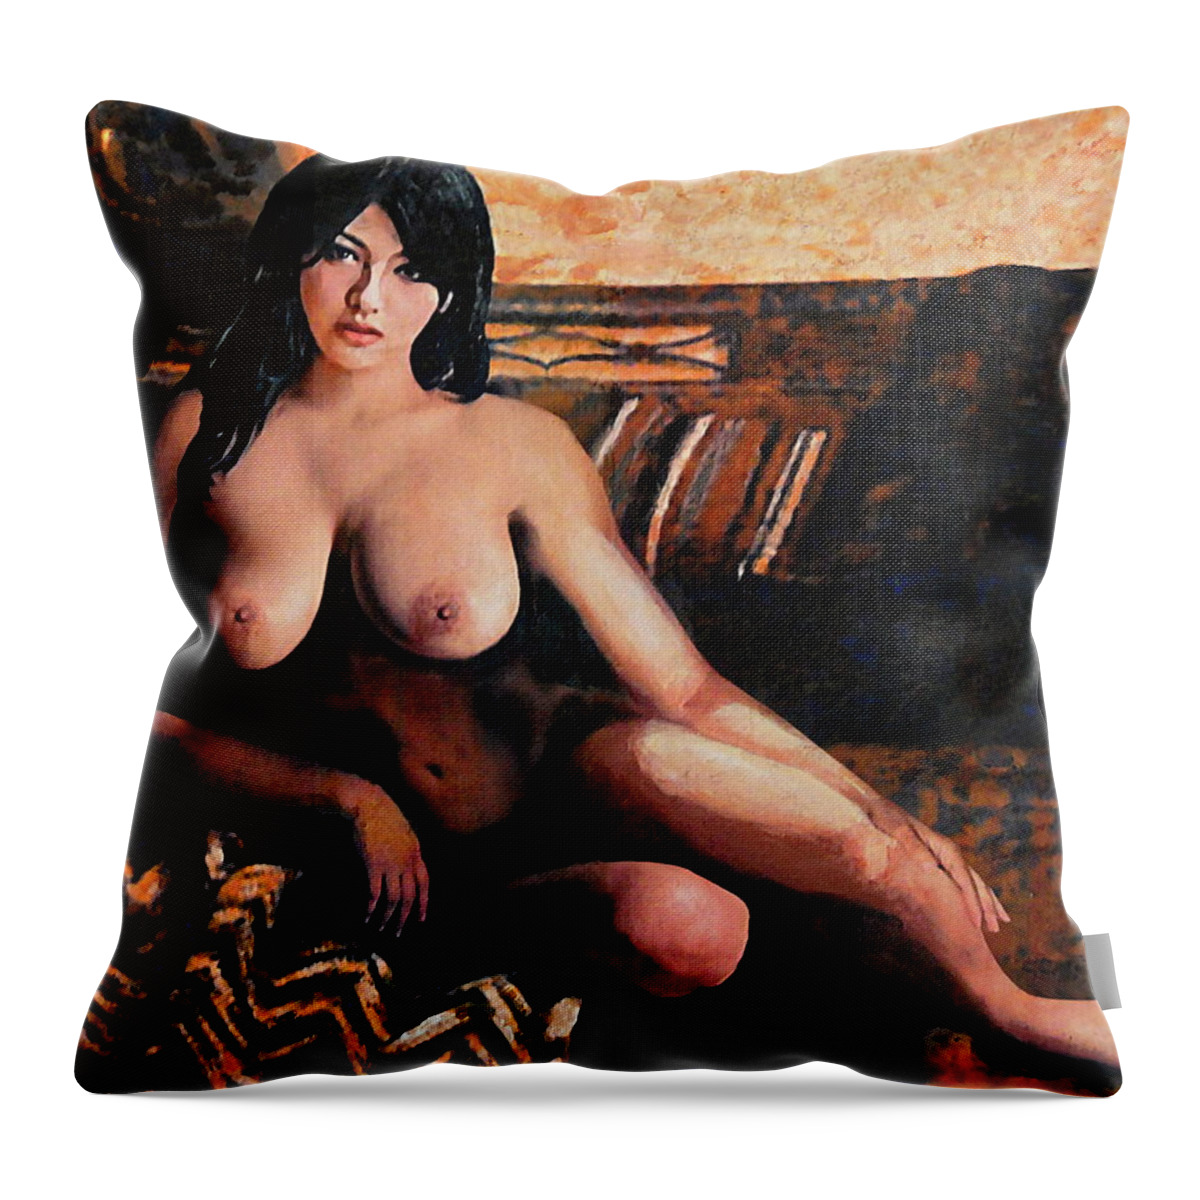 Original Female Nude Nudes Goddess Sitting Seated Acrylic Oil Painting Paintings Throw Pillow featuring the painting Original Female Nude Goddess Eirene II Seated by G Linsenmayer